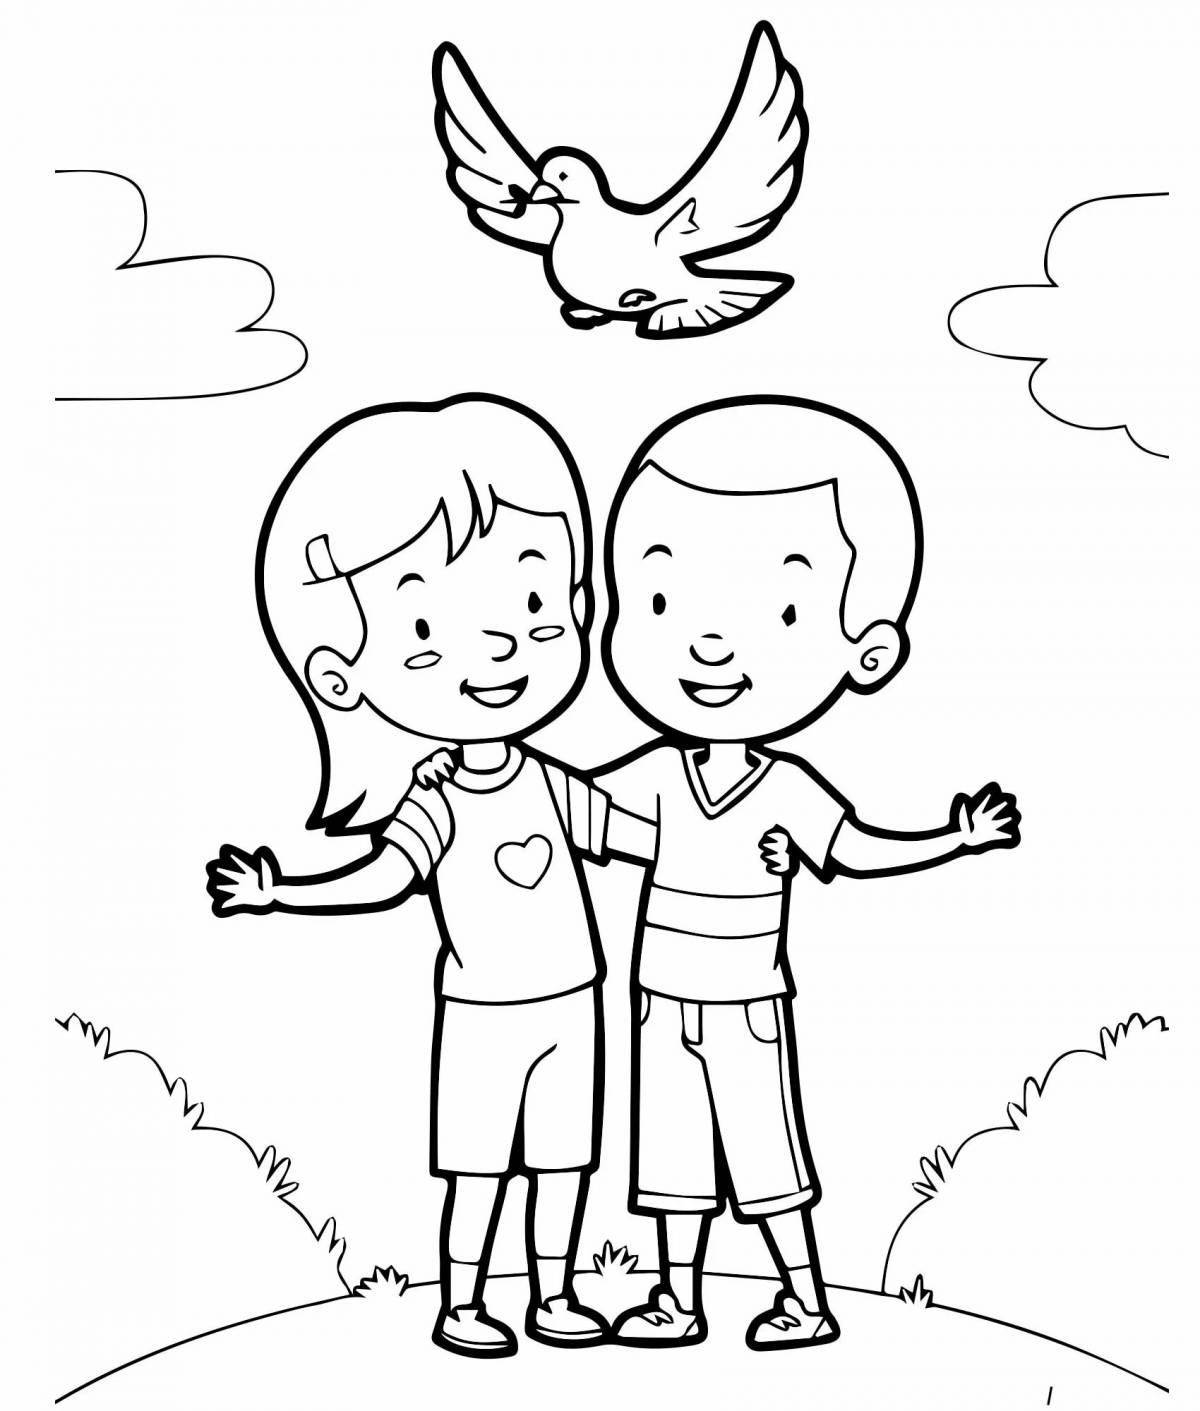 Fun friendship coloring book for kids